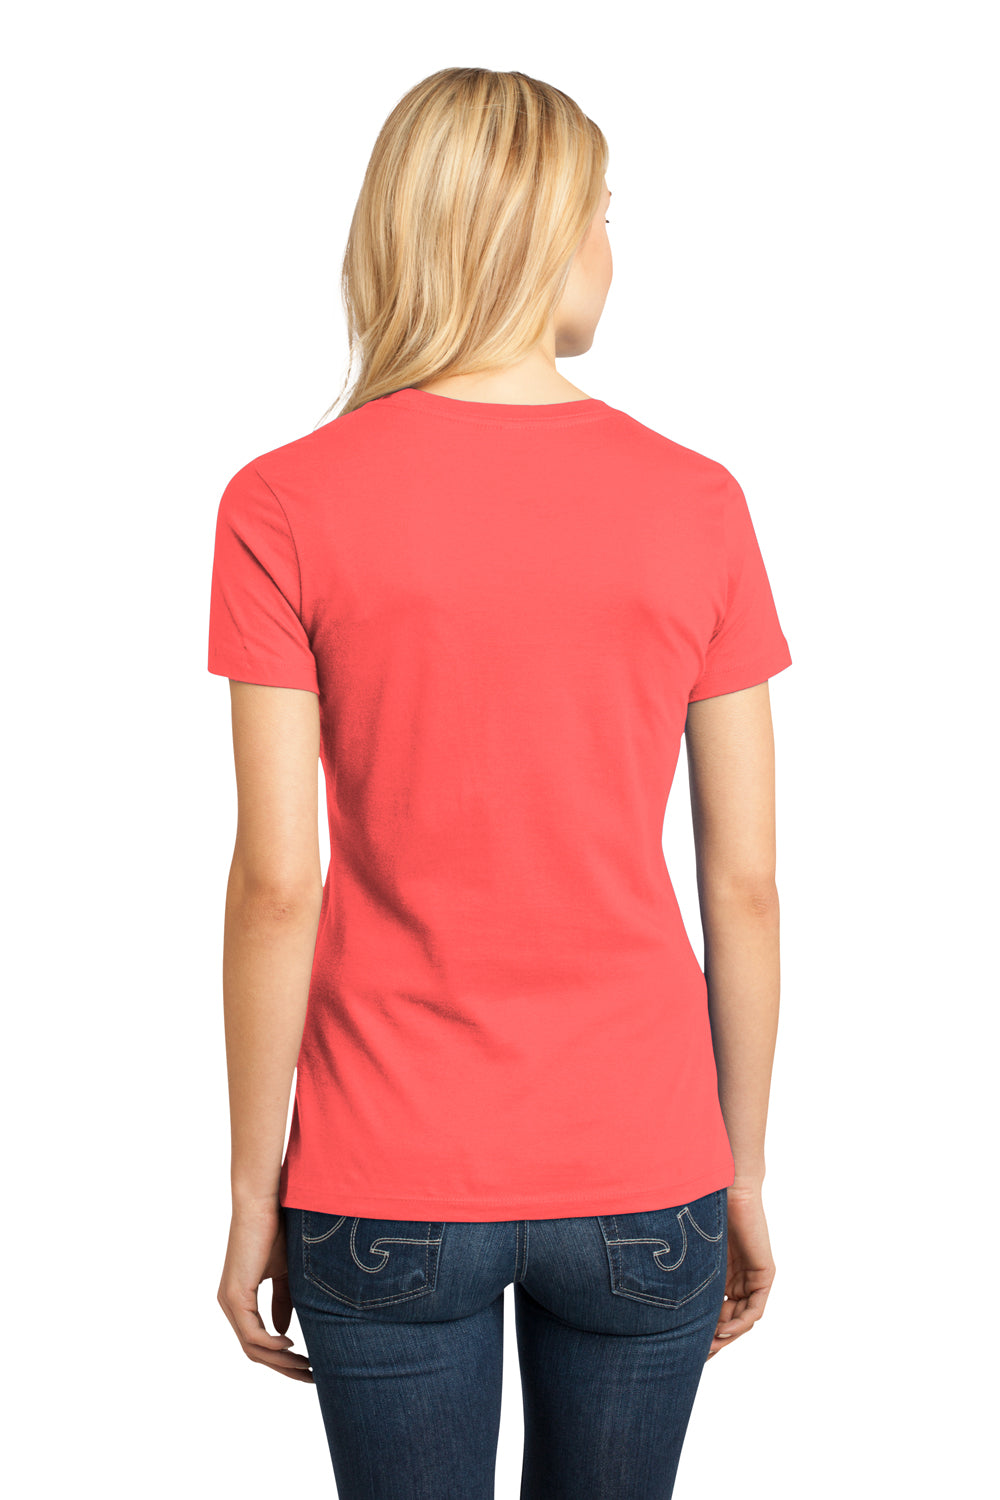 District DM104L Womens Perfect Weight Short Sleeve Crewneck T-Shirt Coral Pink Back